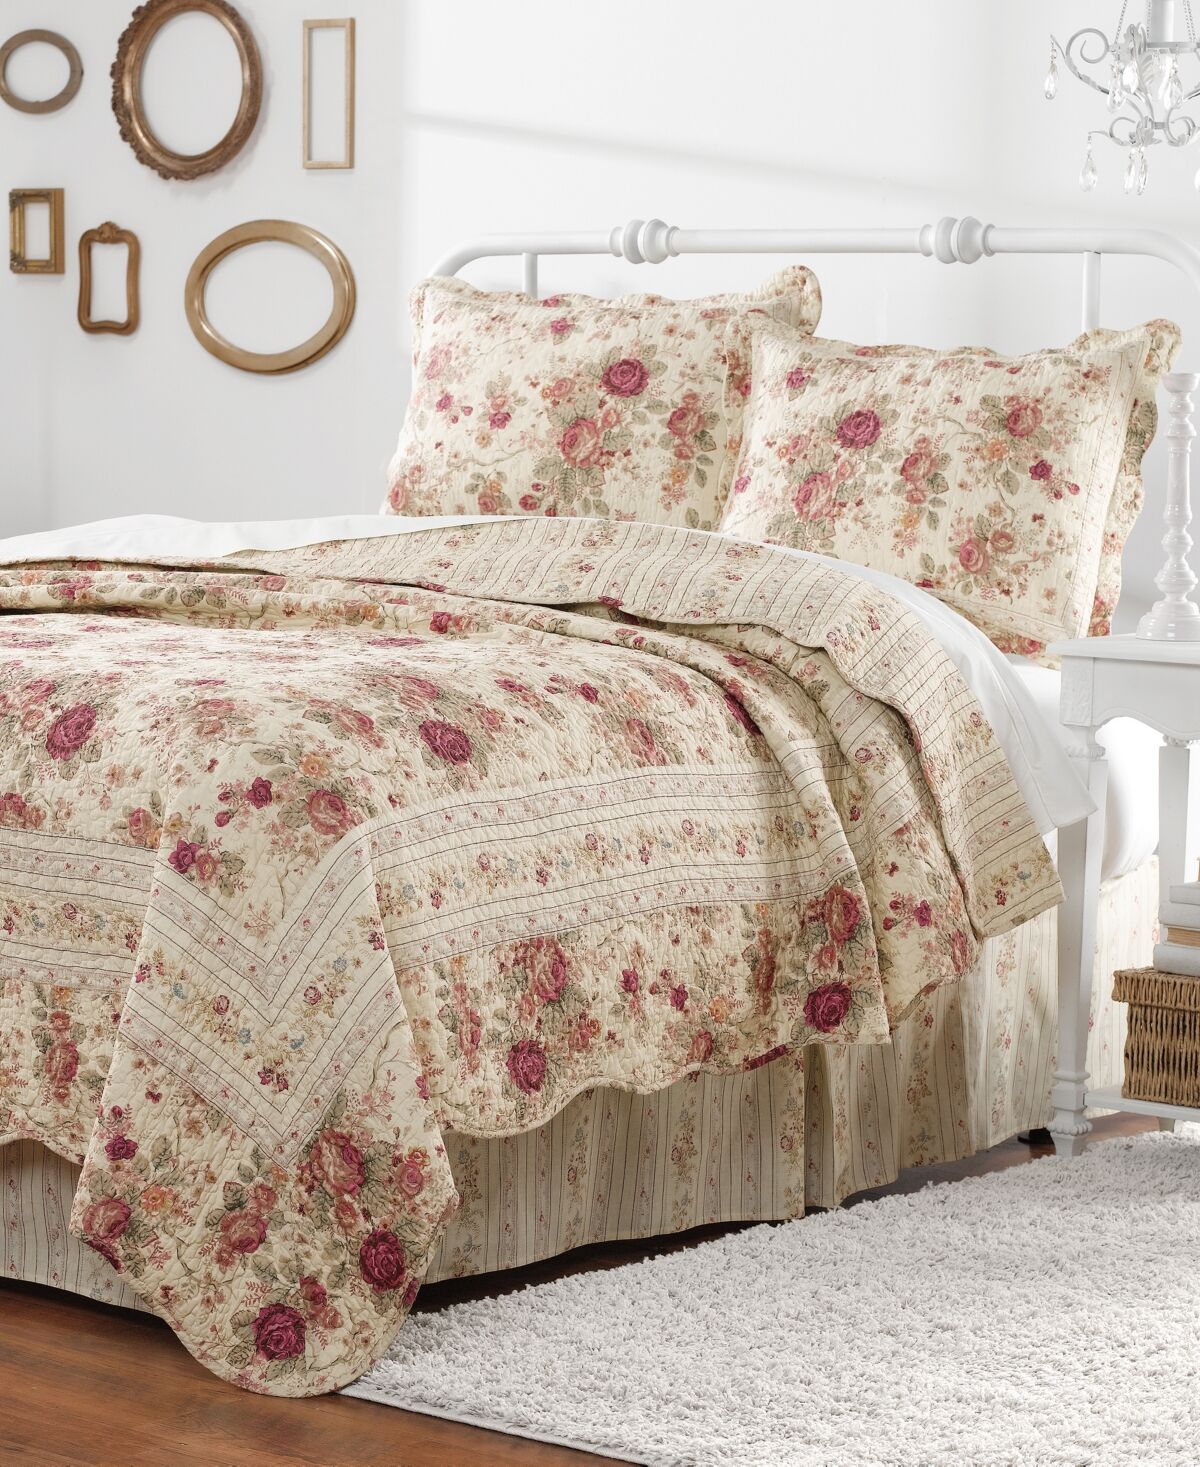 Greenland Home Fashions Antique-Like Rose 100% Cotton Reversible 3 Piece Quilt Set, King - Ecru